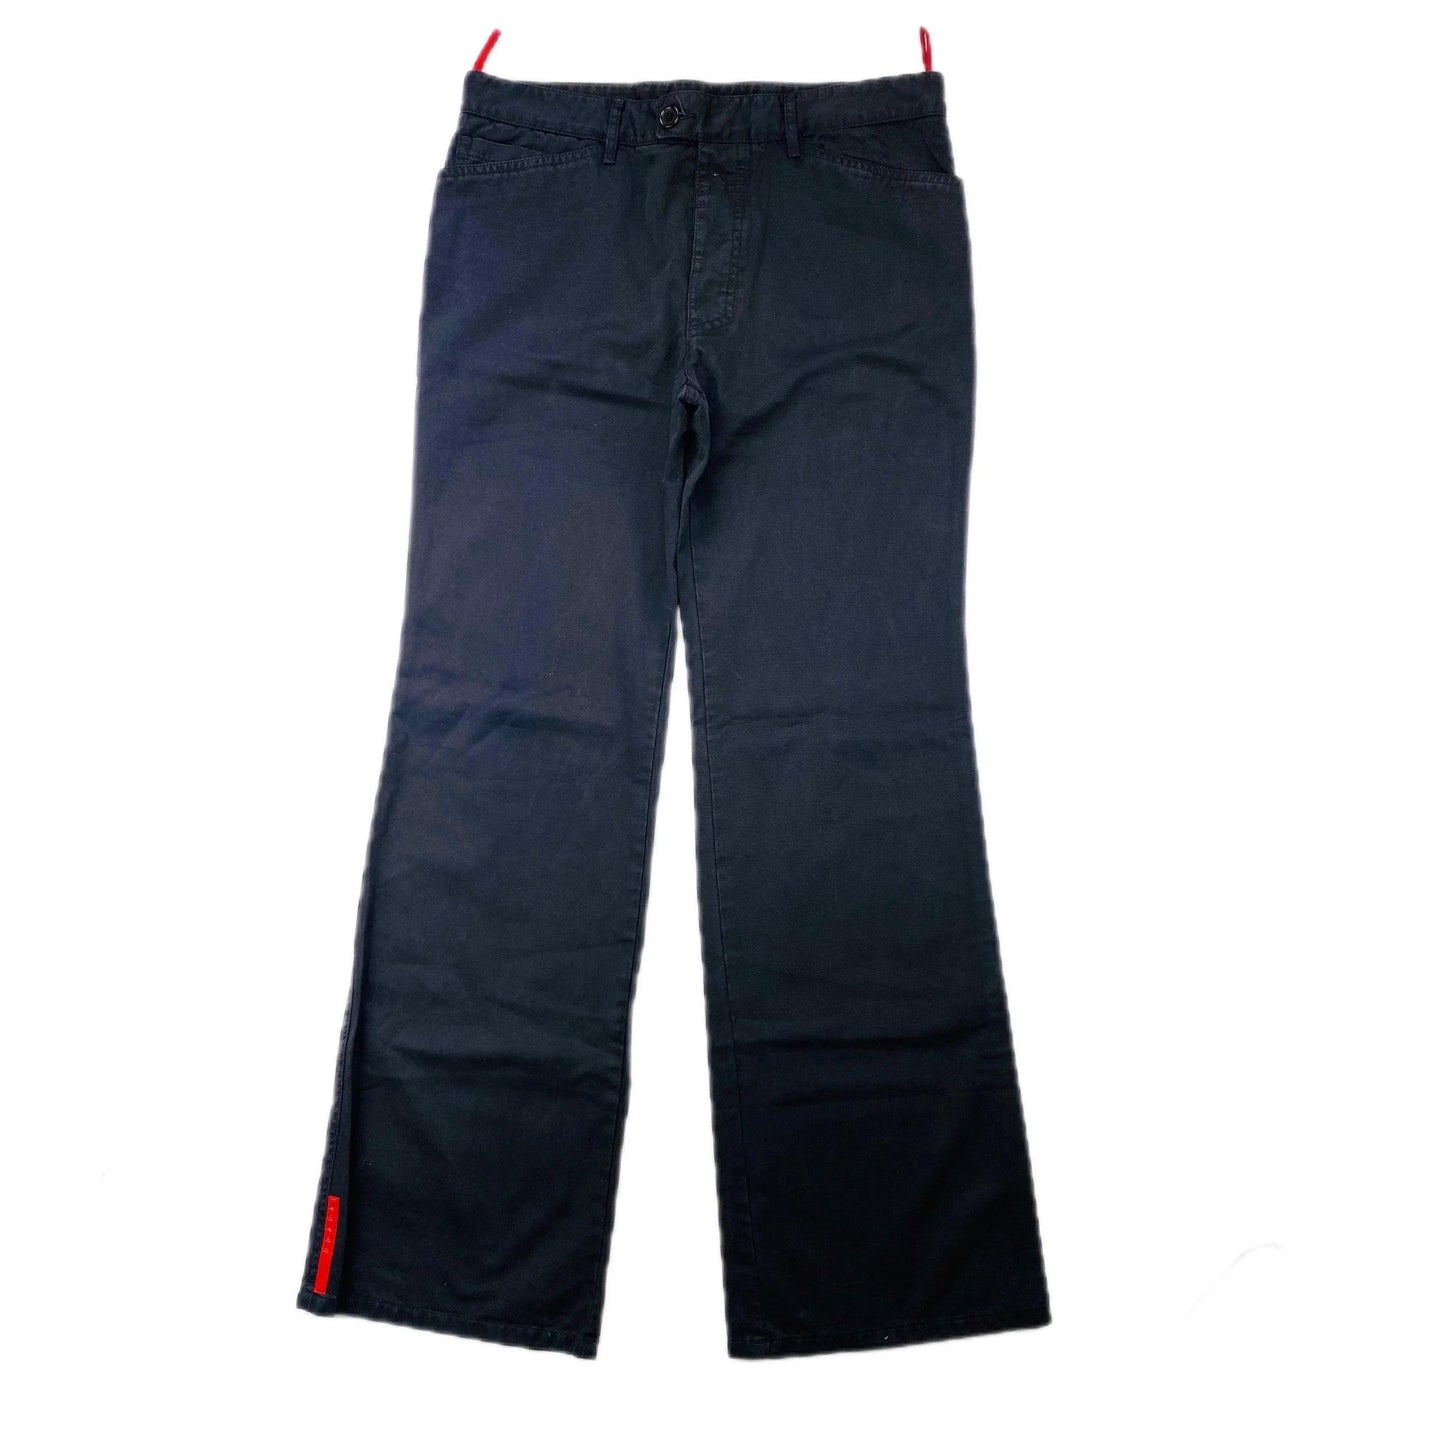 PRADA SPORT 2000S FLARED PANT - Known Source